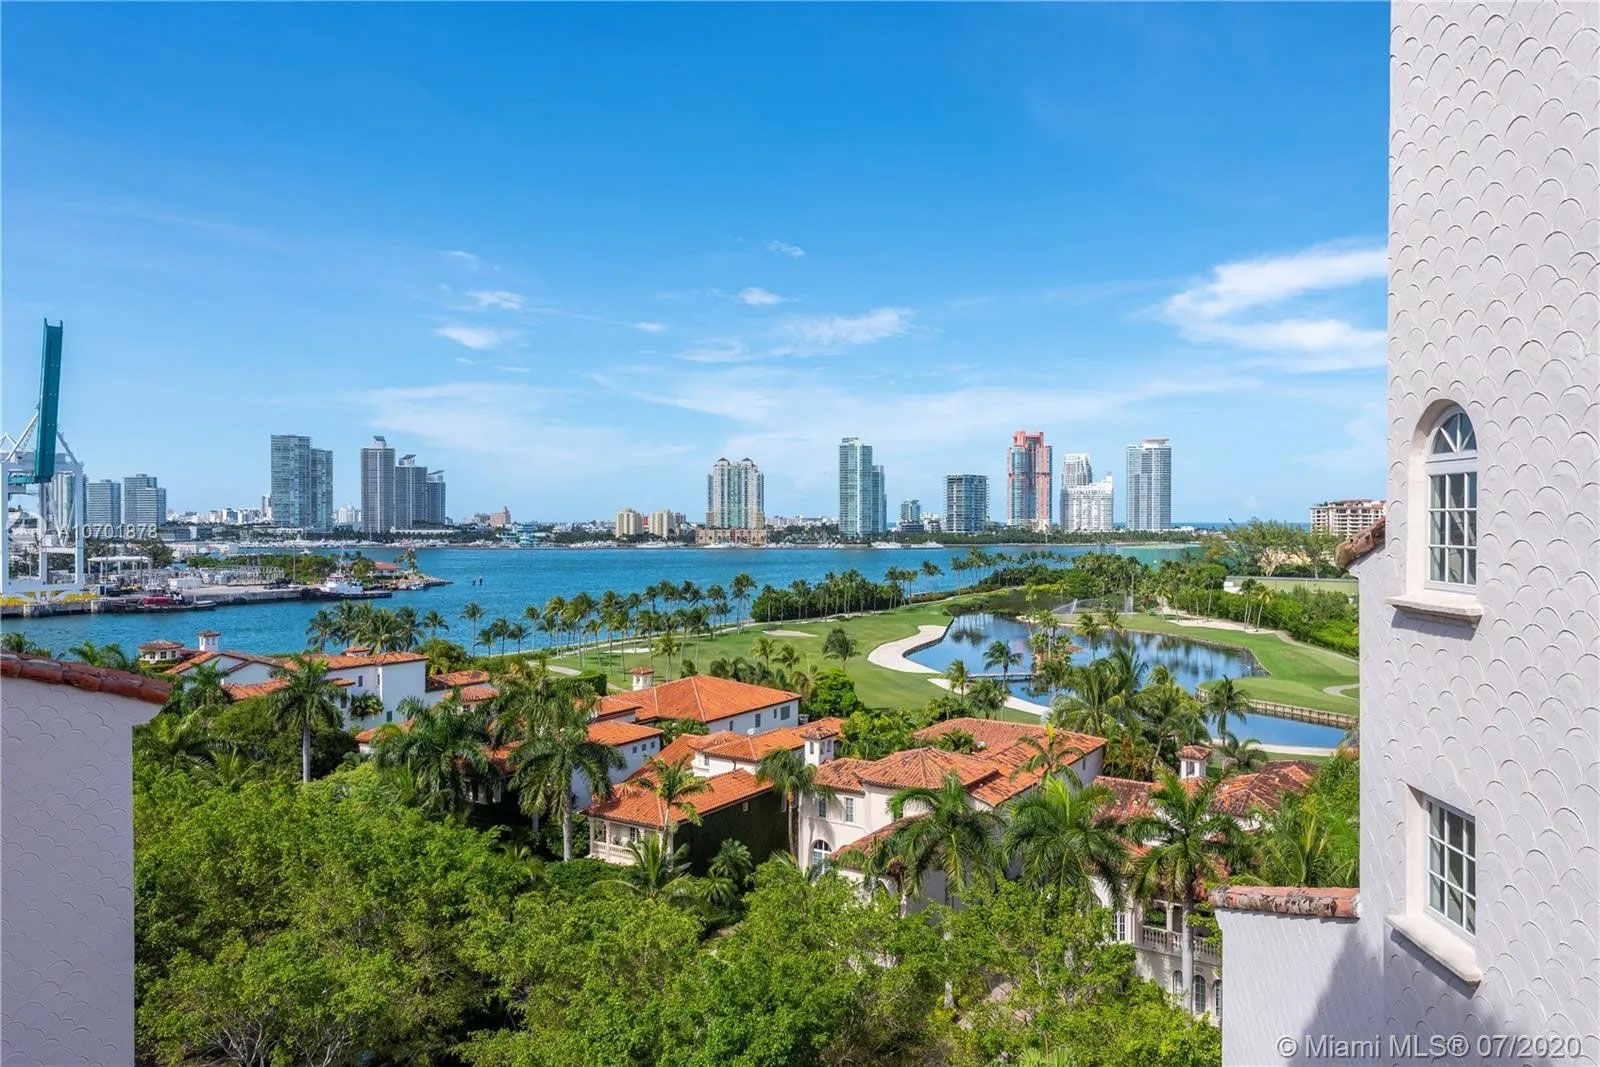 5 Things that attract the rich and famous to Fisher Island, Florida